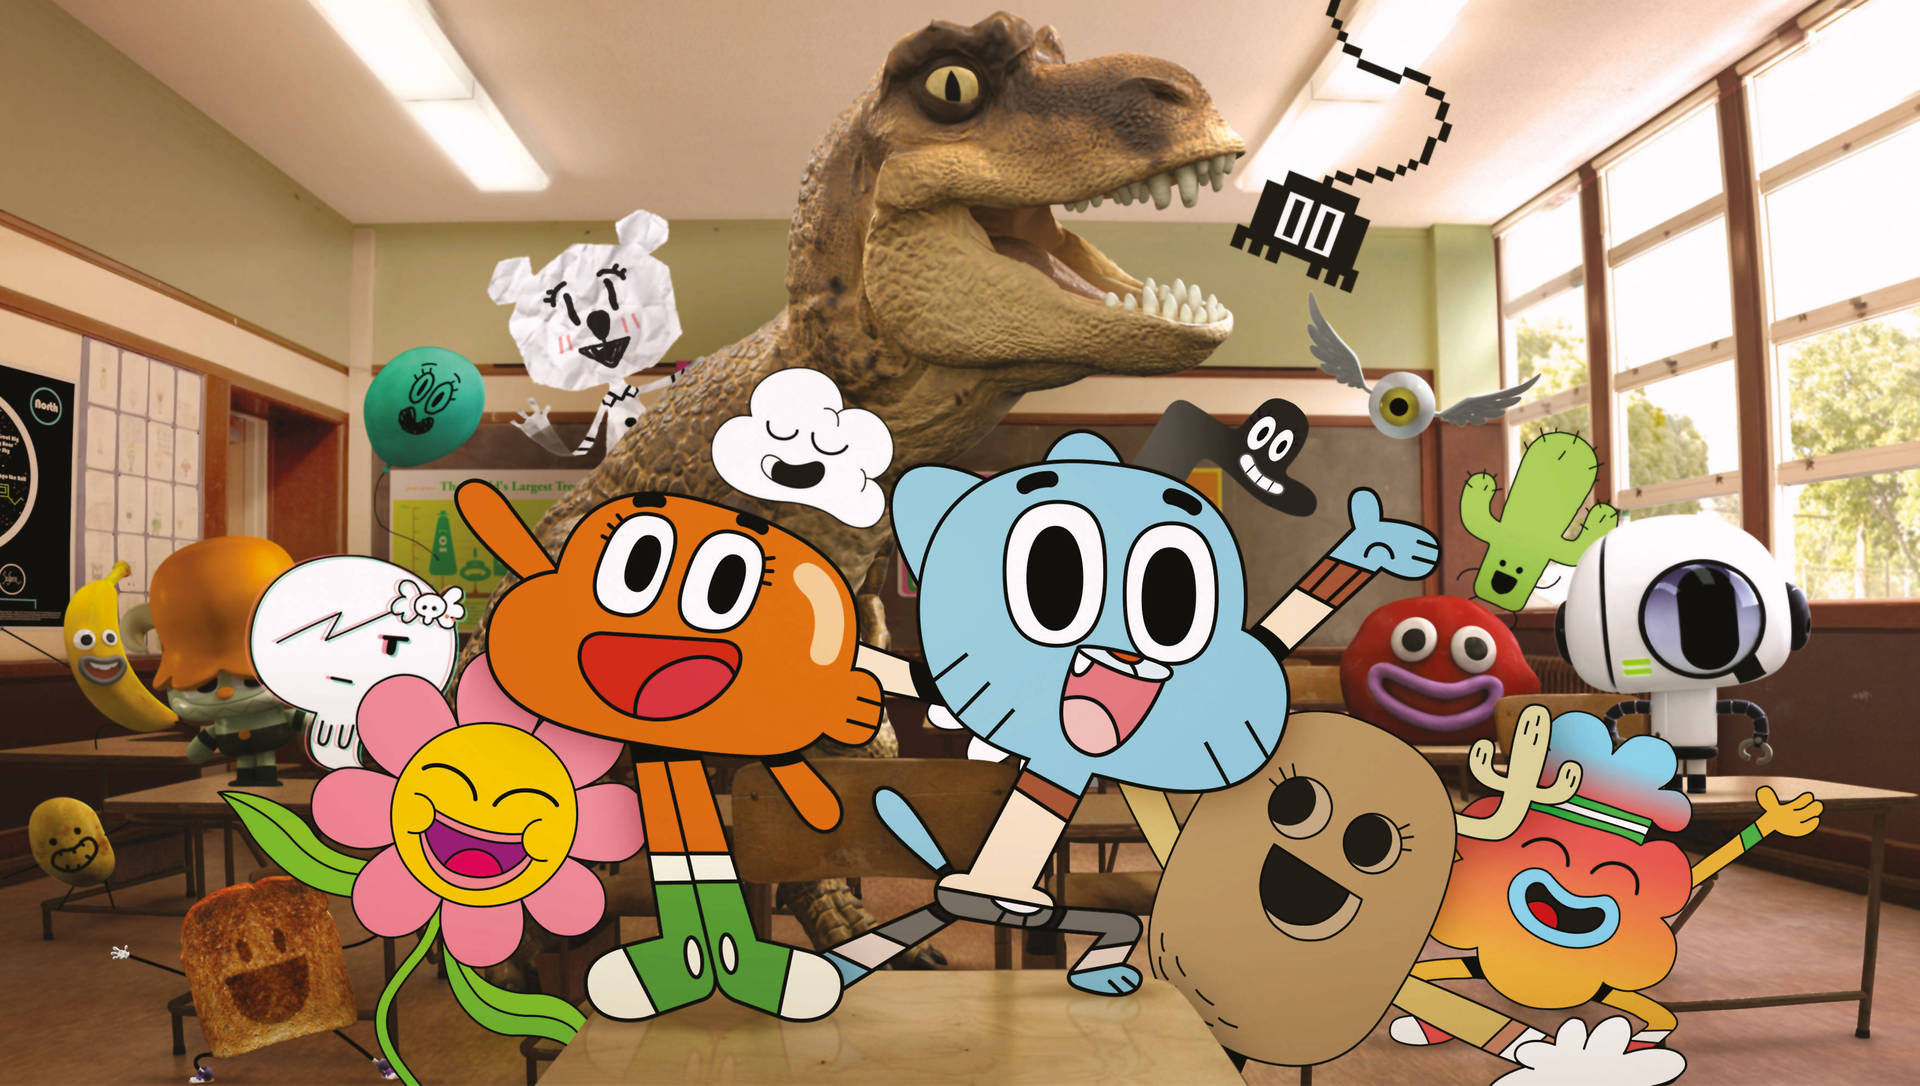 Gumball Friends In Classroom Background